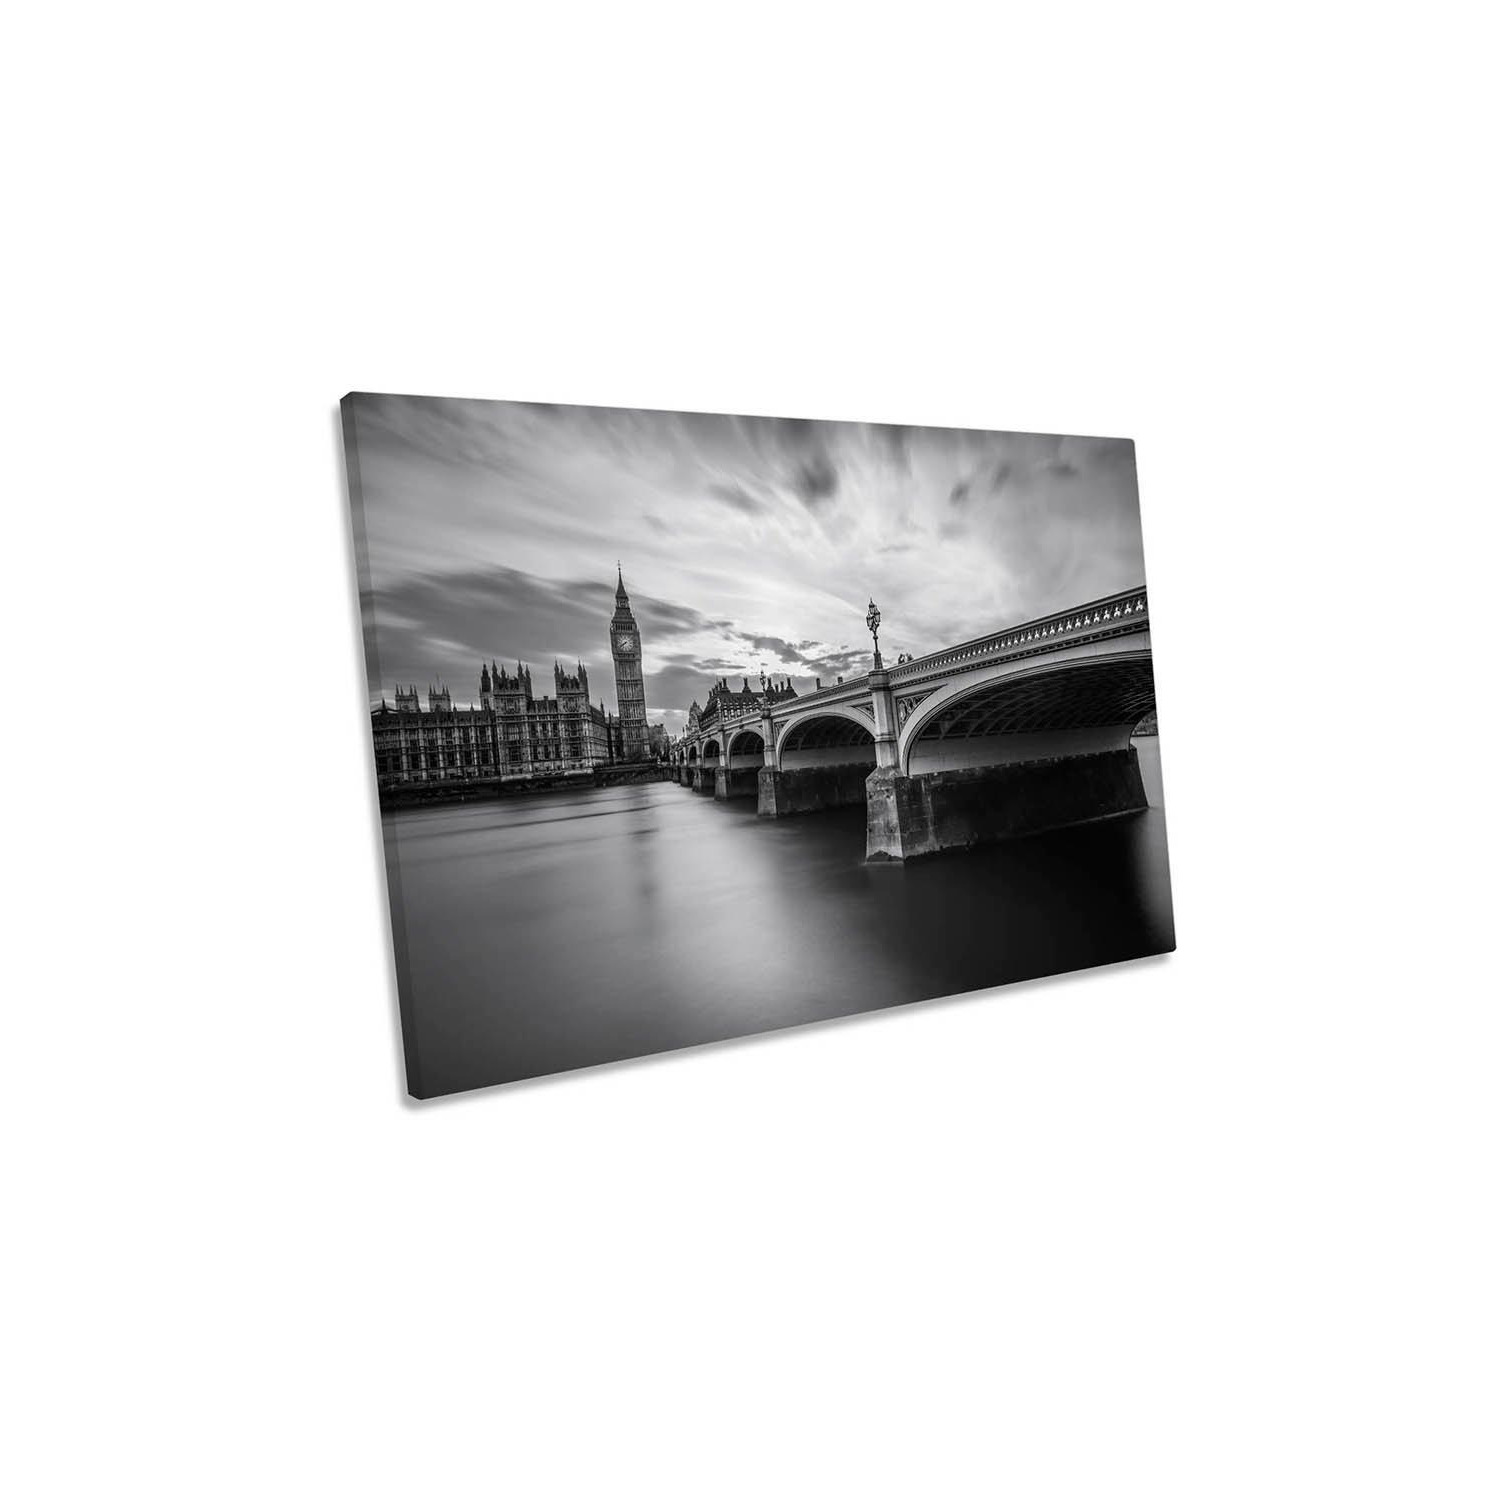 Westminster Serenity London City Canvas Wall Art Picture Print - image 1